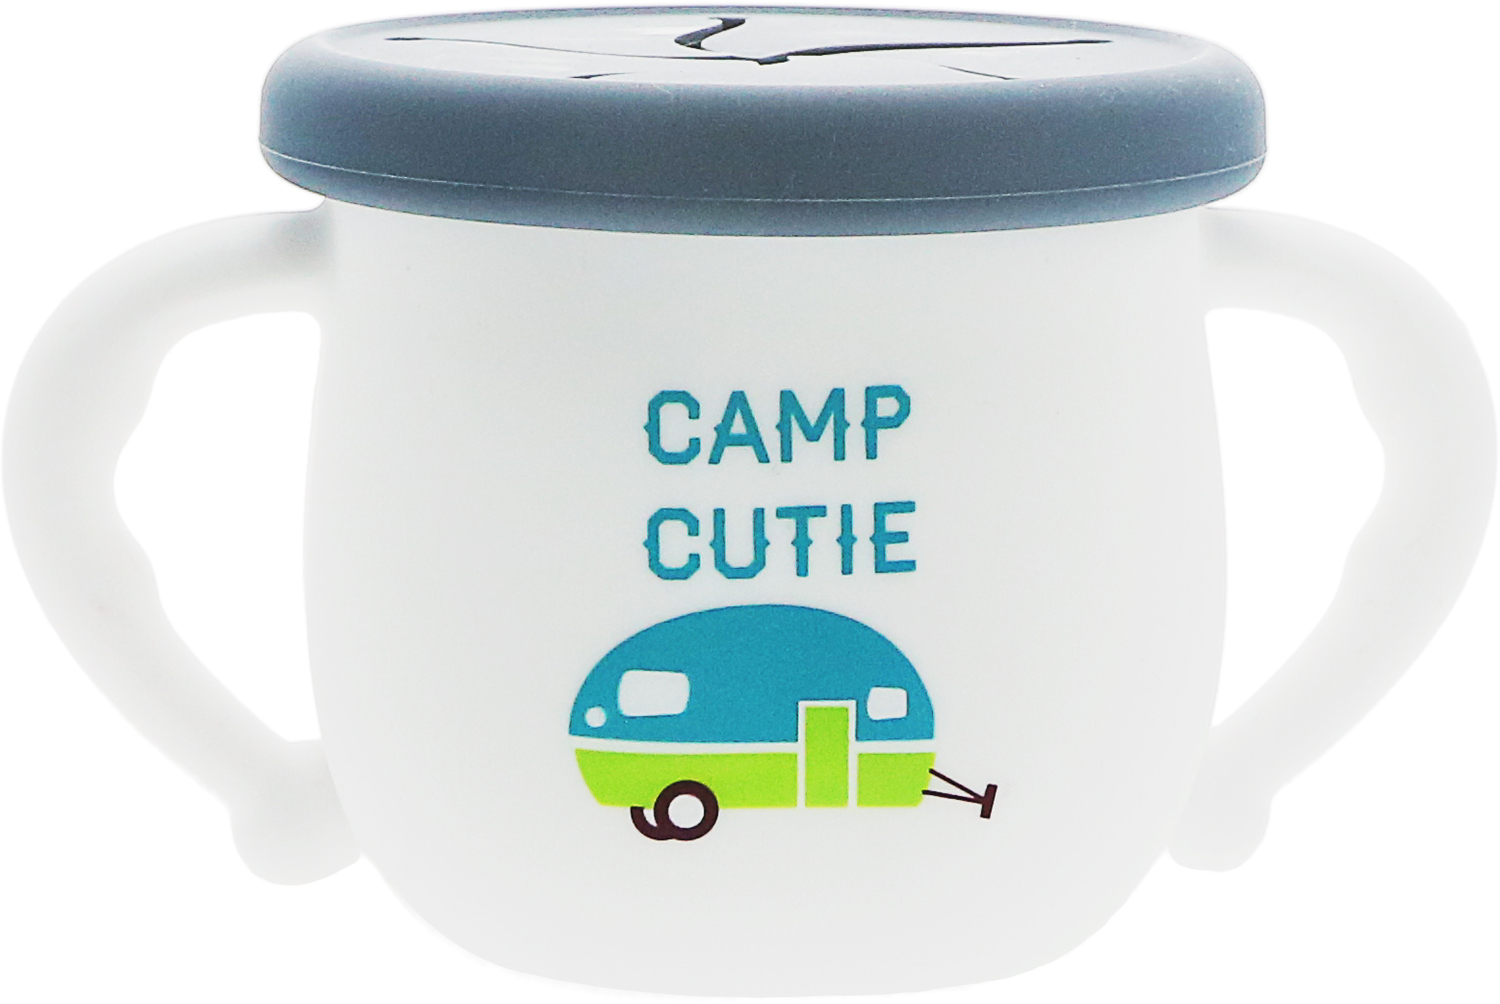 Camp Cutie by We Baby - Camp Cutie - 3.5" Silicone Snack Bowl with Lid